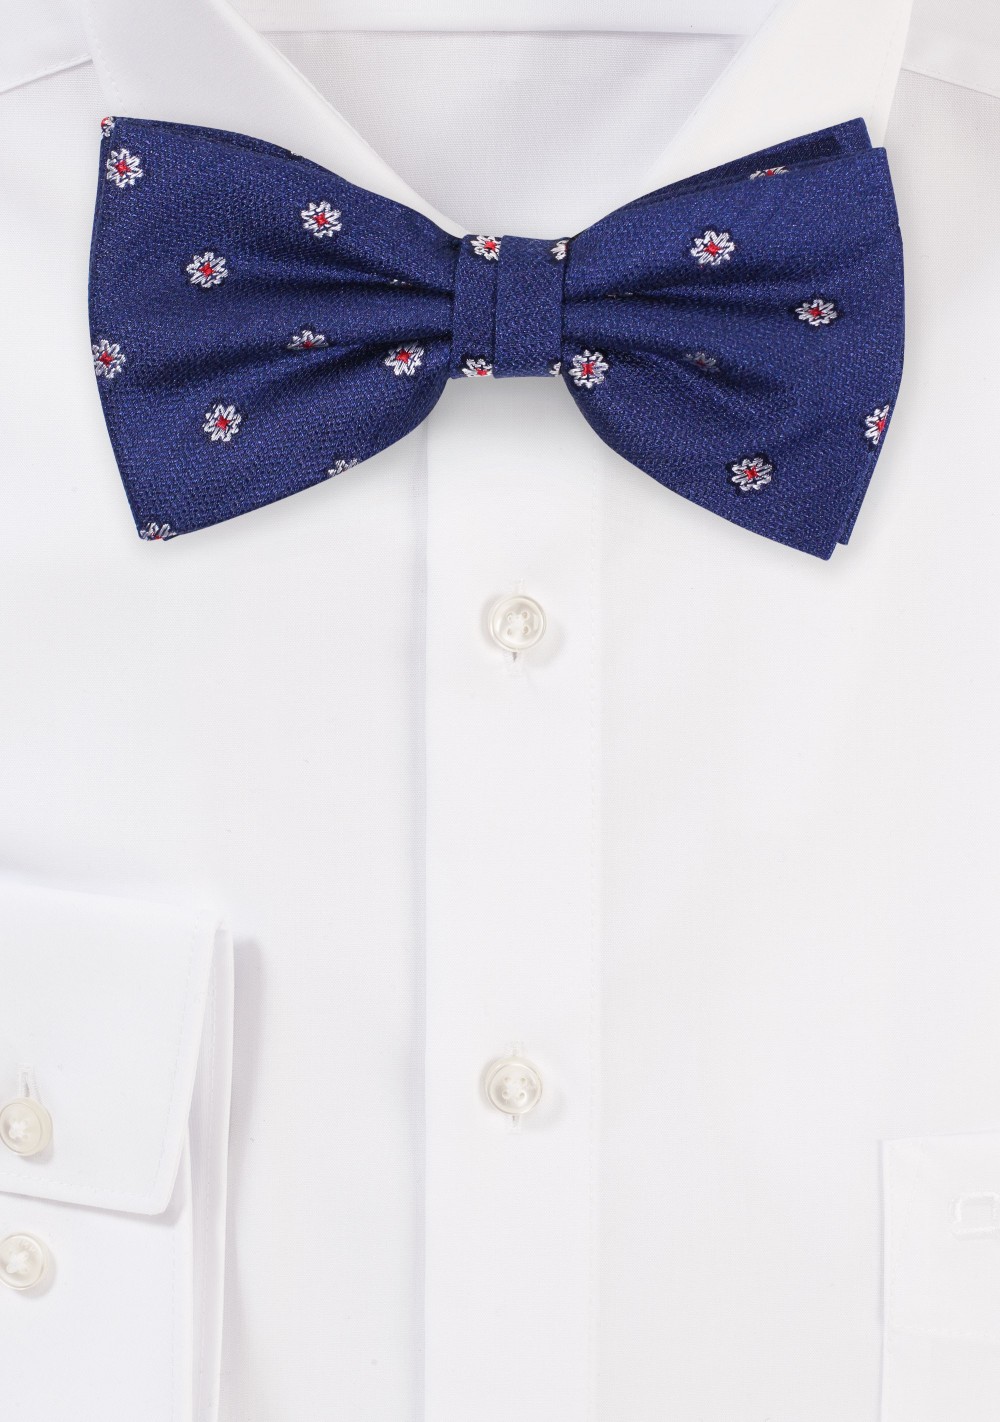 Blue Textured Floral Bow tie